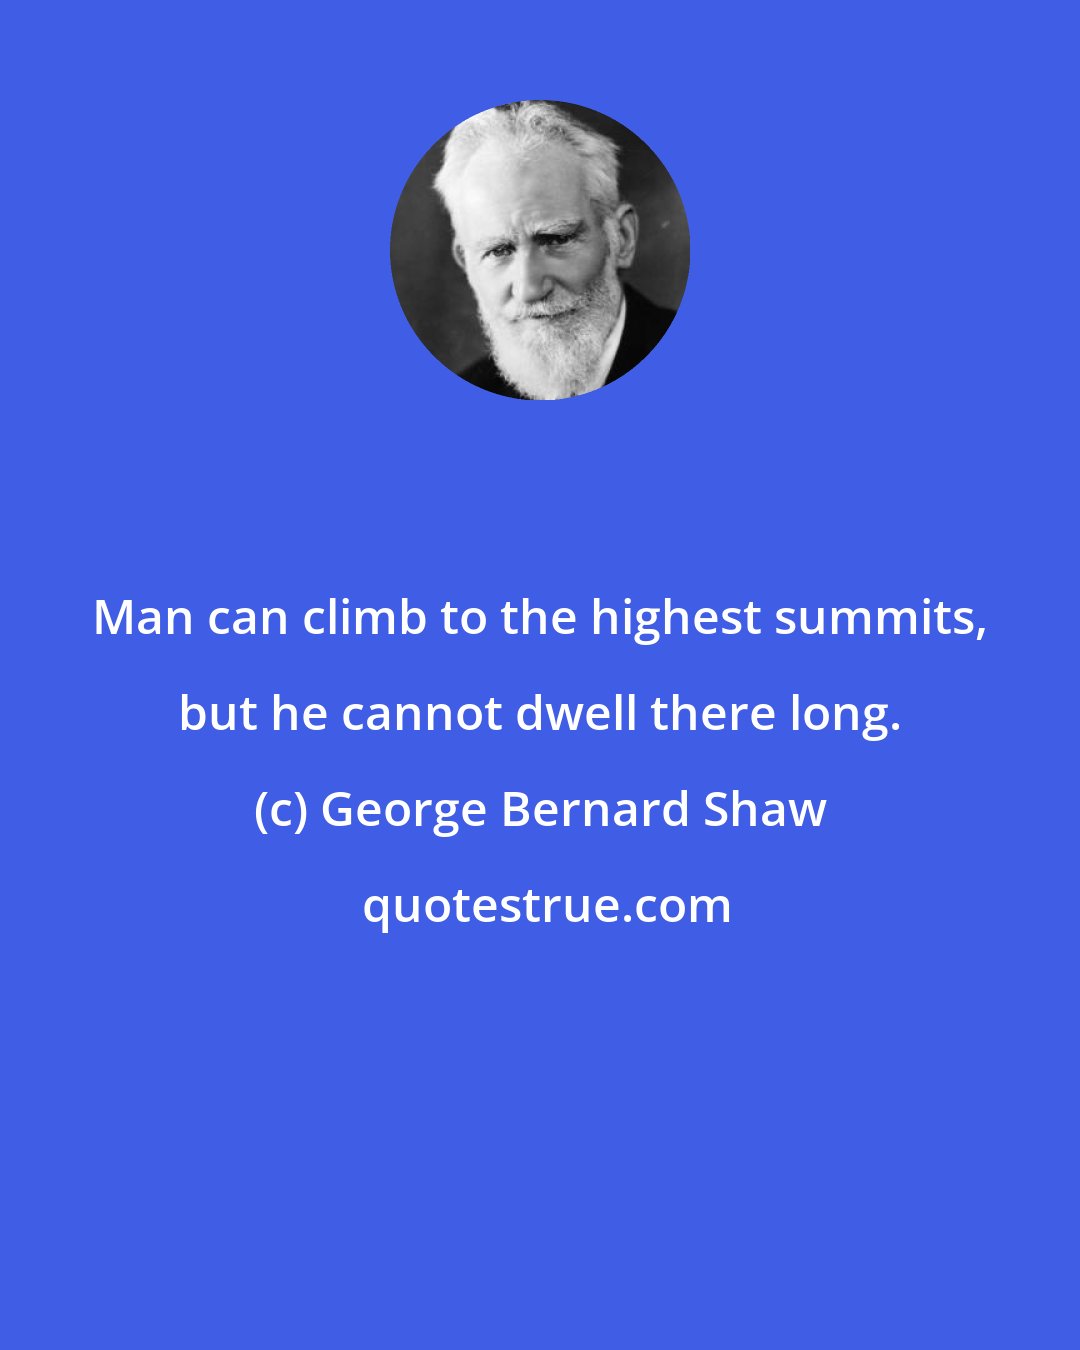 George Bernard Shaw: Man can climb to the highest summits, but he cannot dwell there long.